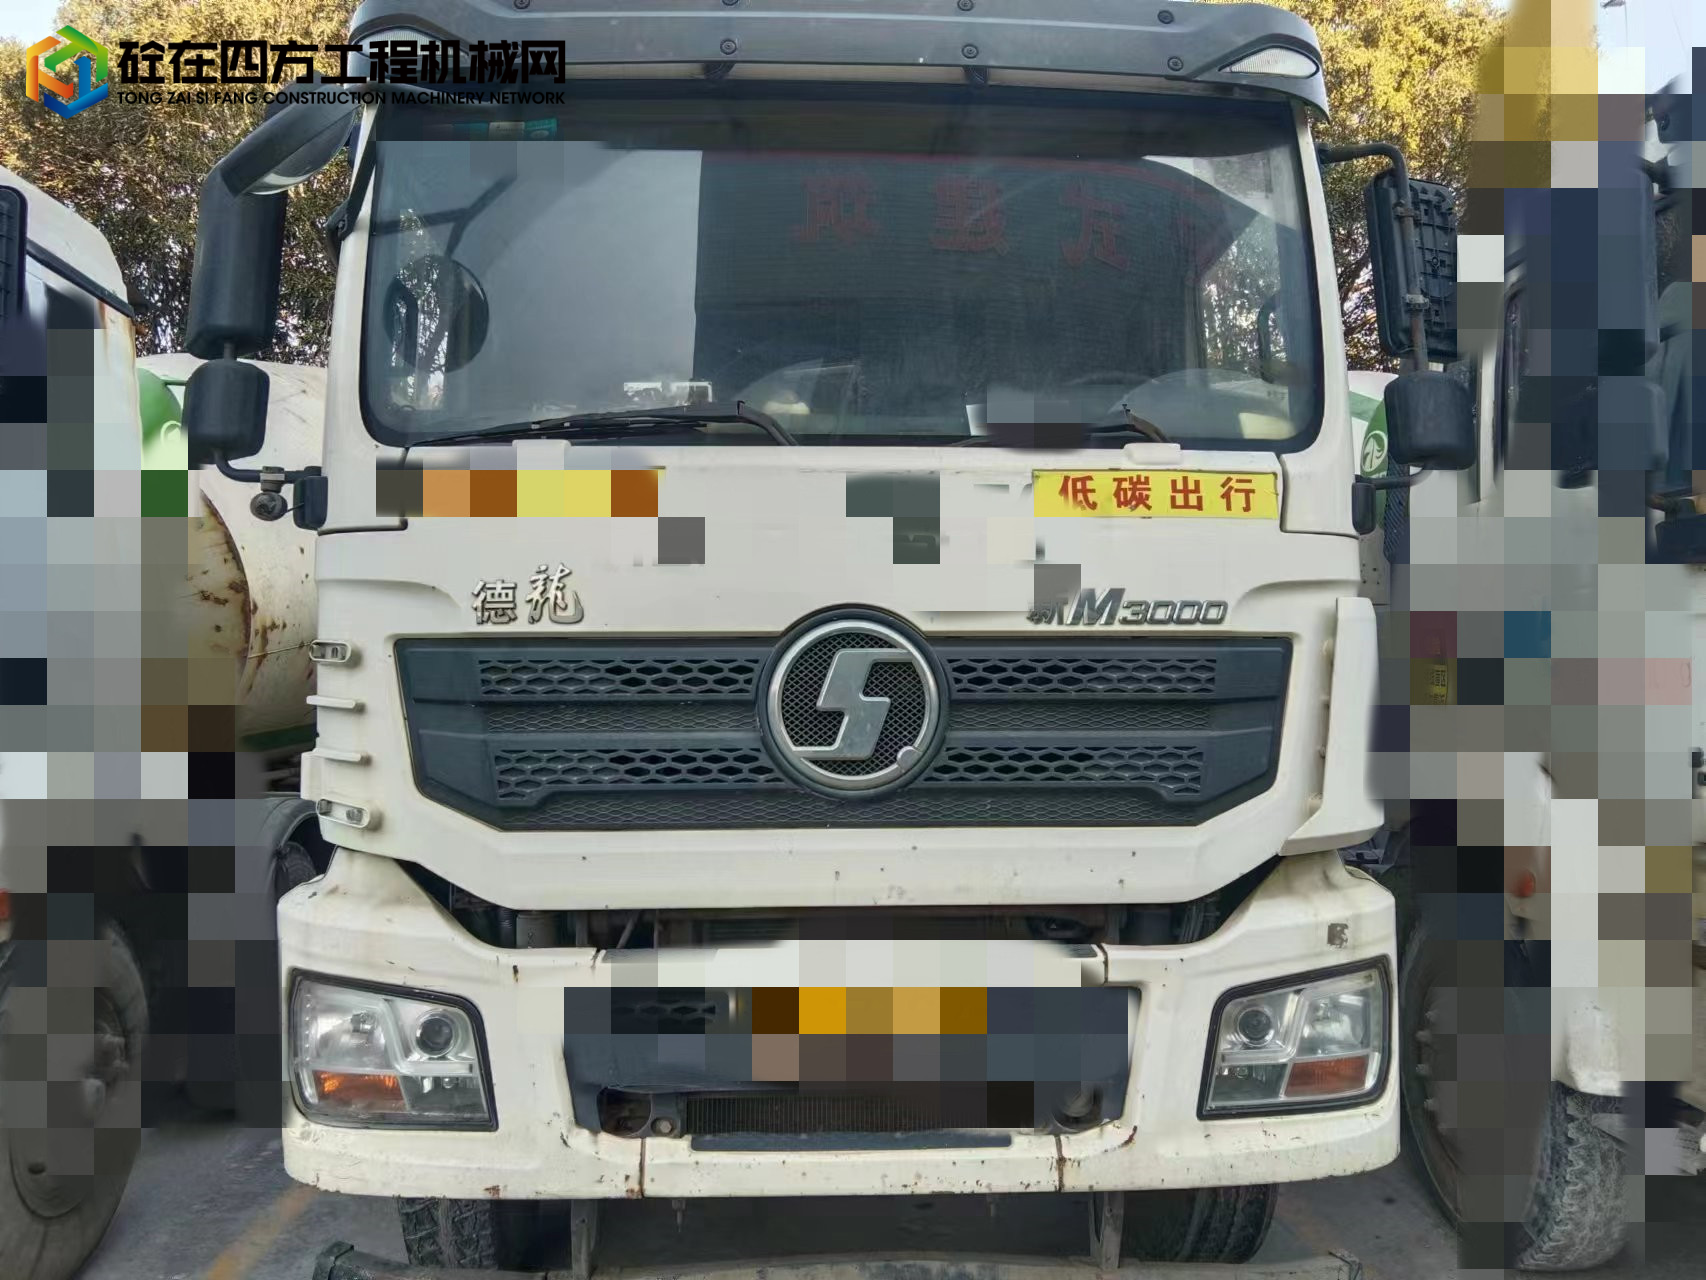 https://images.tongzsf.com/tong/truck_machine/20240123/165af841105dc5.jpg